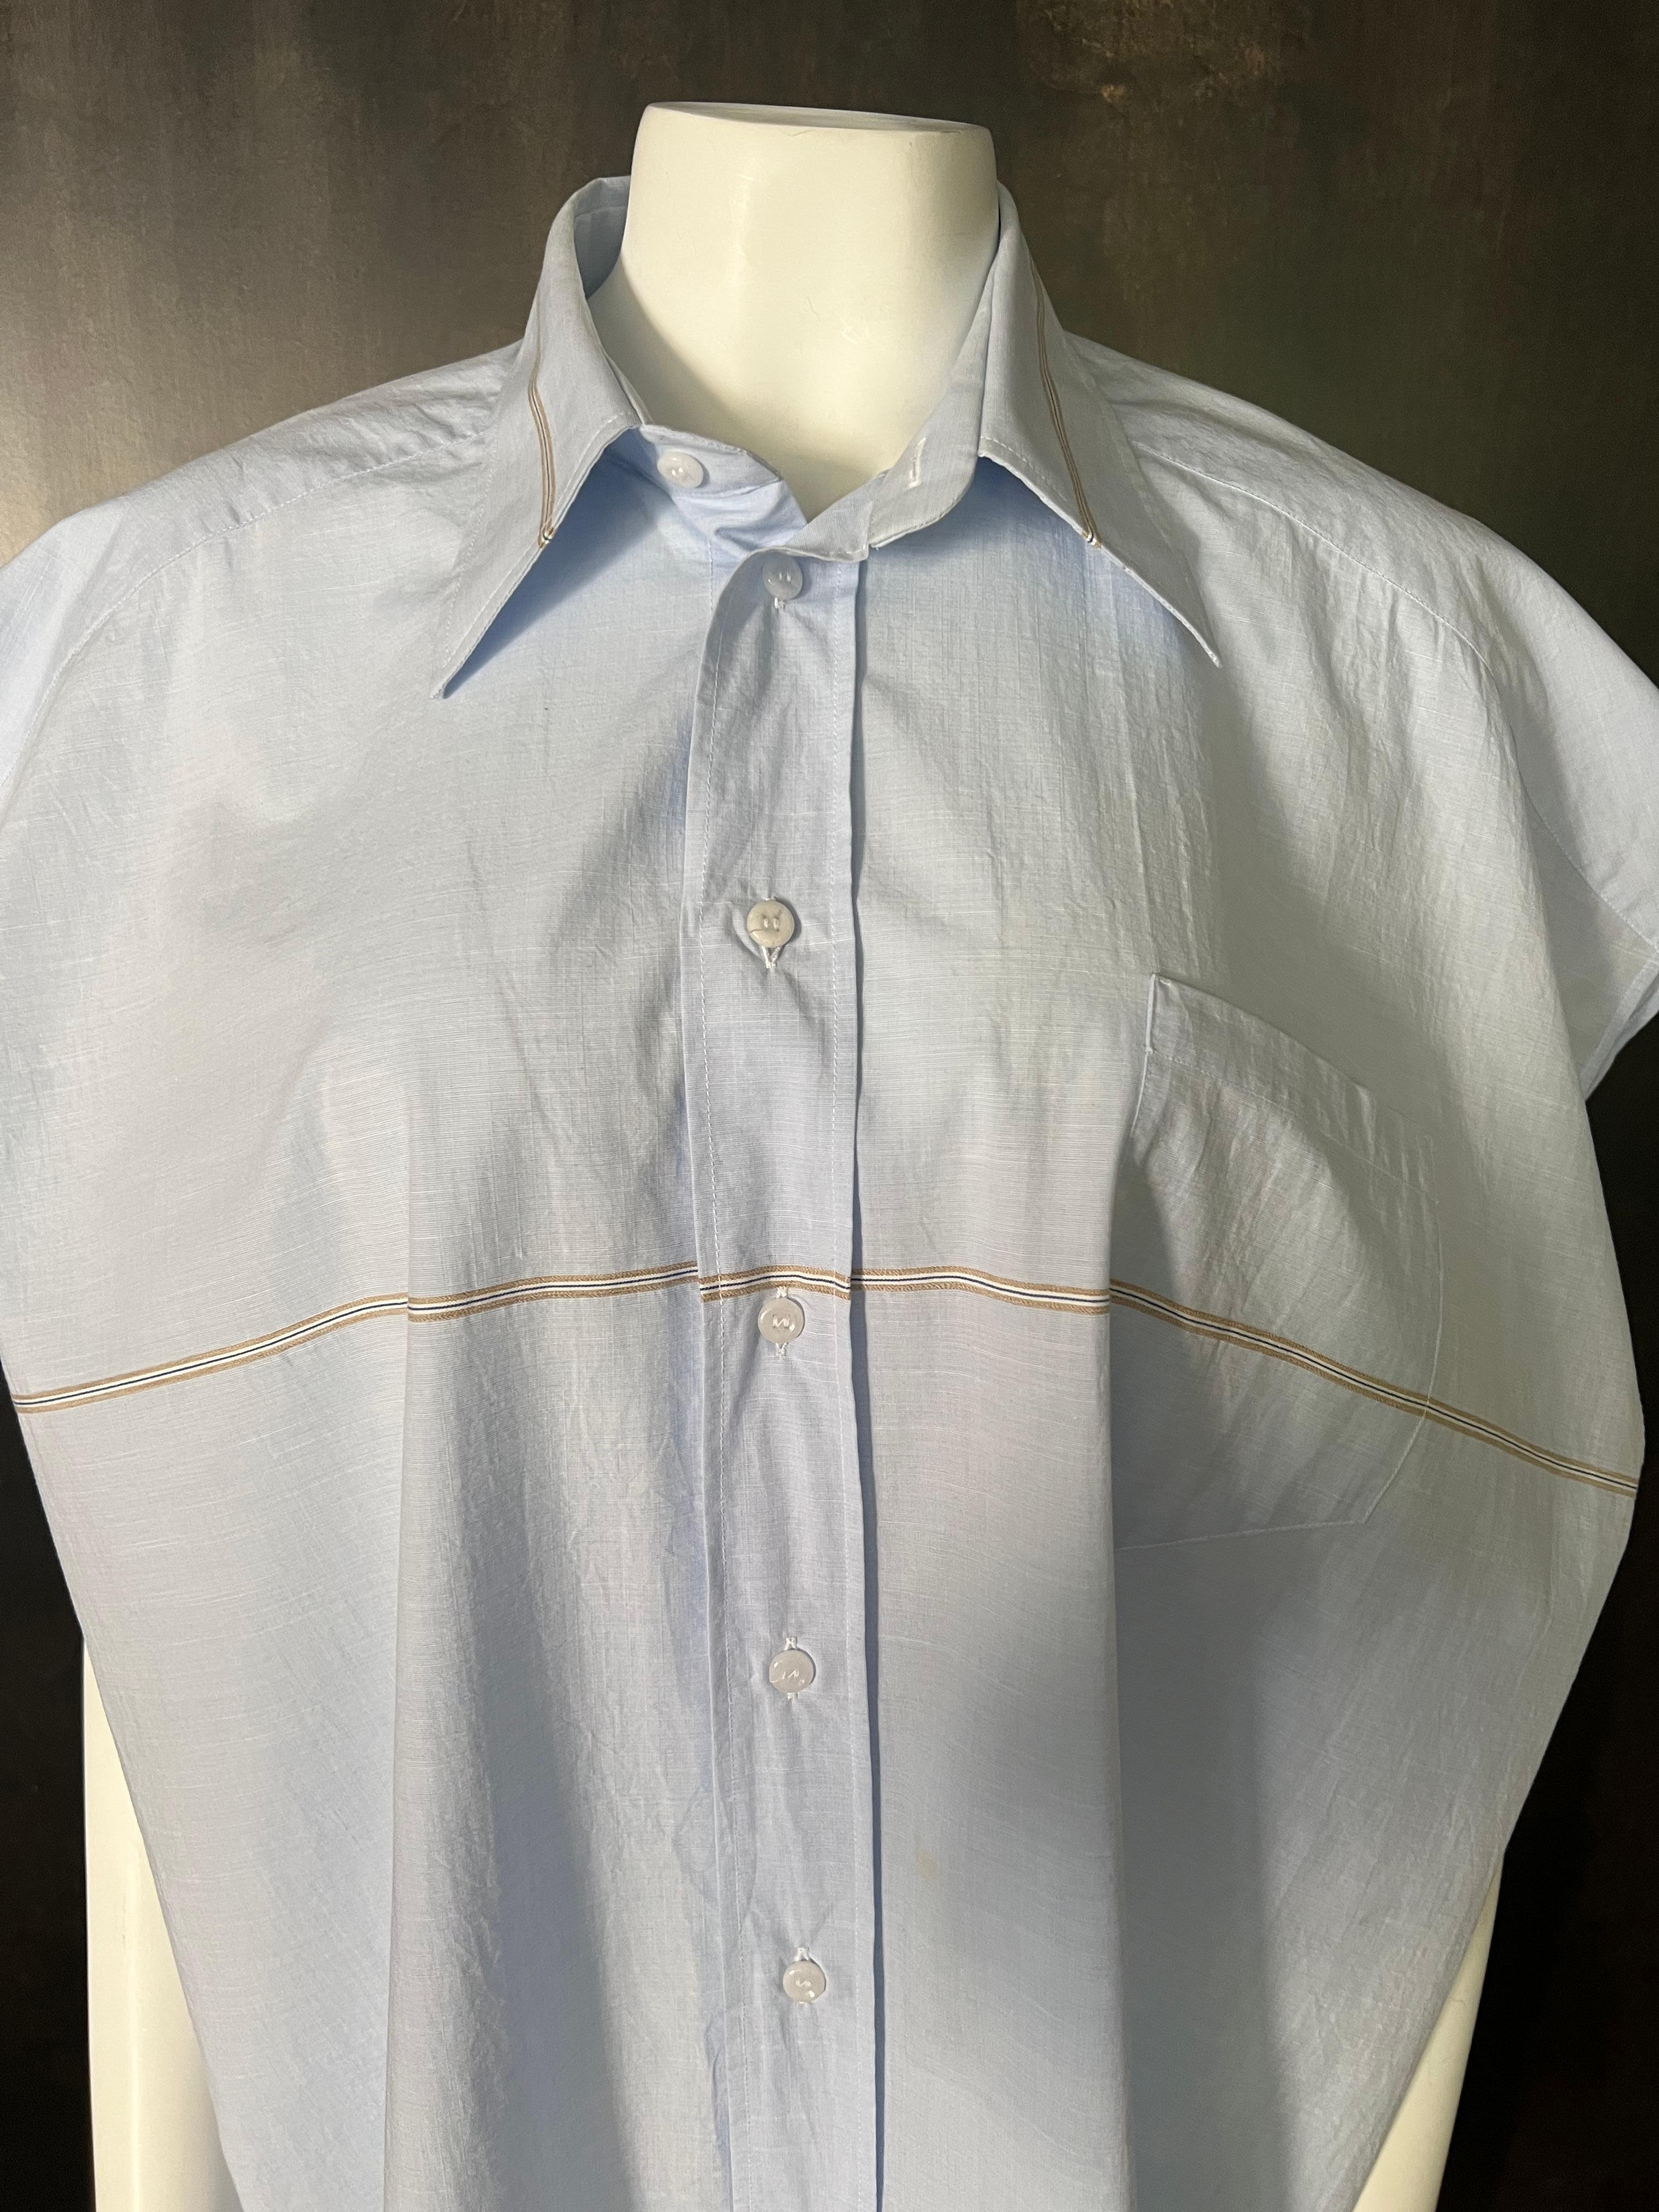 Maison Margiela Light Blue Button Down Dress, Size XS In Excellent Condition For Sale In Beverly Hills, CA